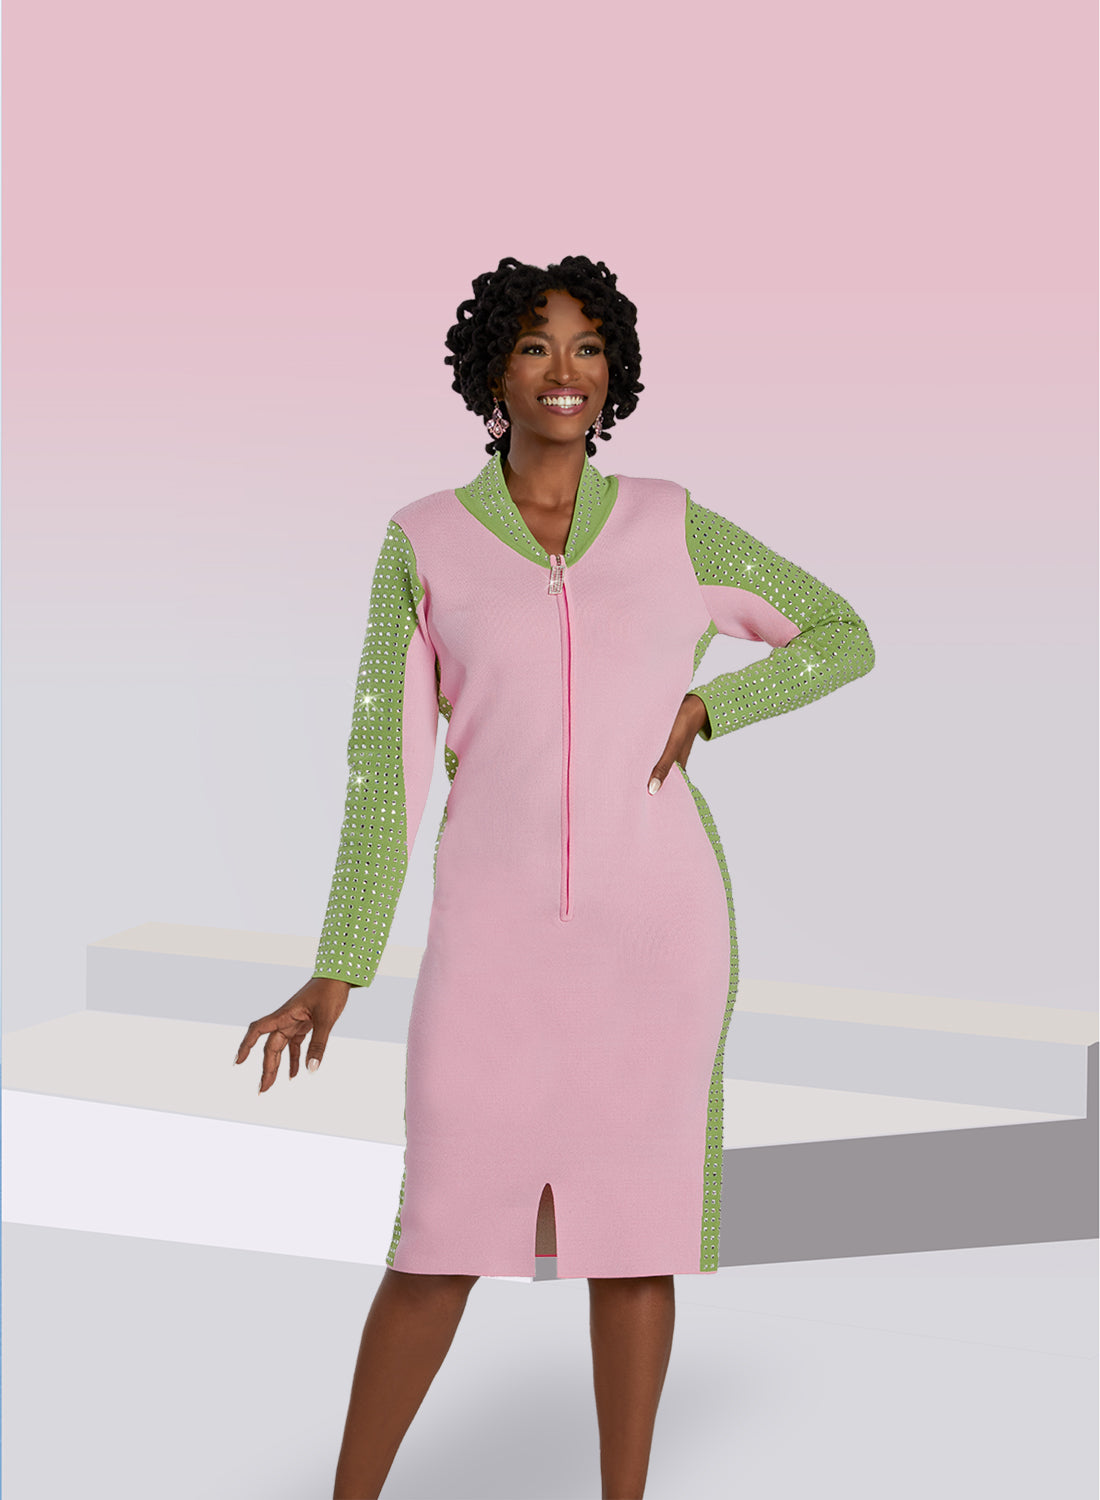 Donna Vinci 13411 - Pink Lime - 2 Tone Zip Up Knit Dress with Rhinestones